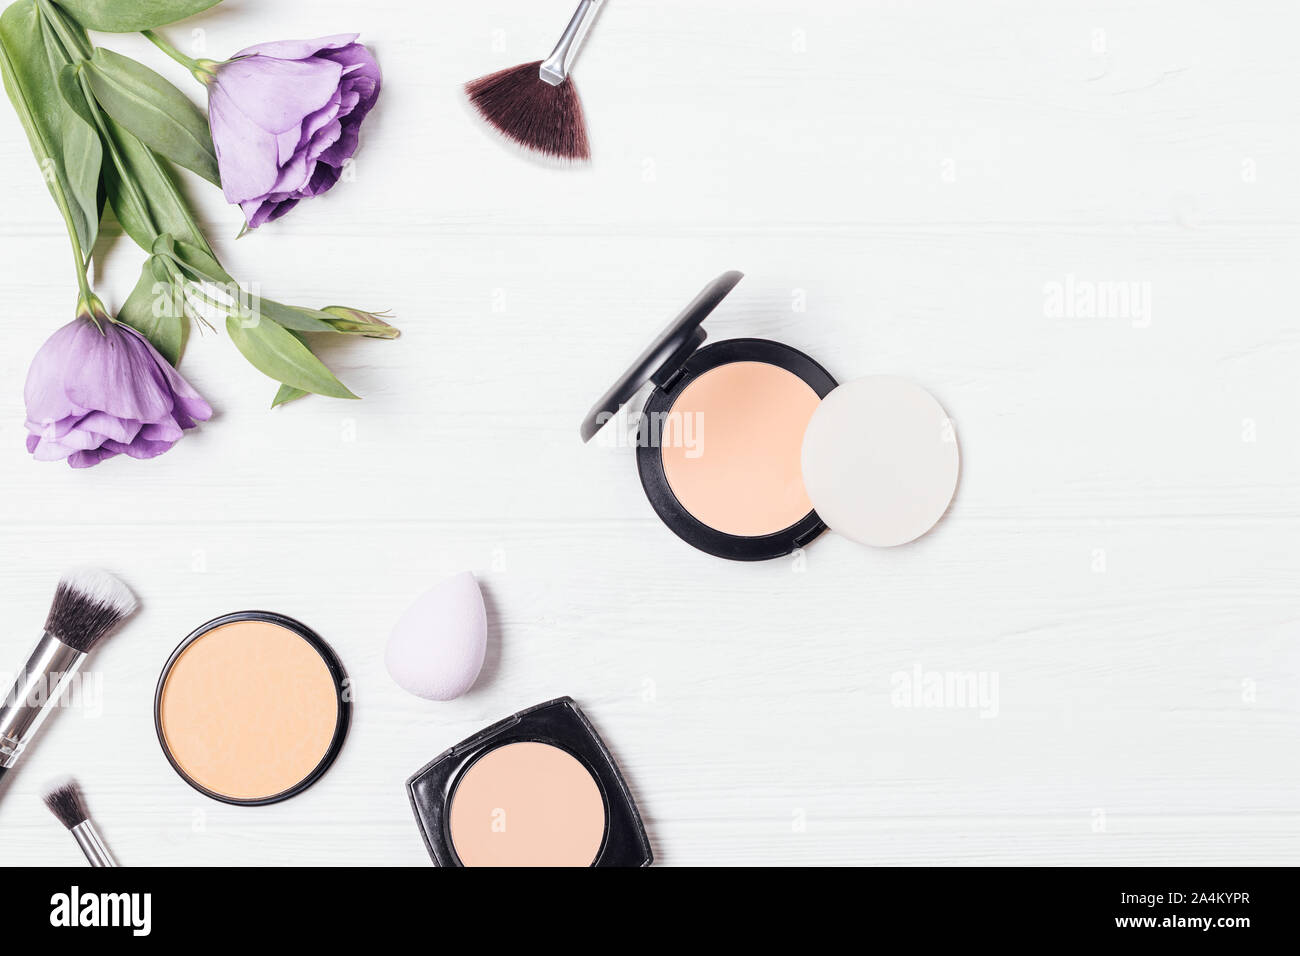 Compact powder and sponge applicator next to brushes, cosmetic products and fresh purple lisianthus on white background, flat lay composition. Stock Photo